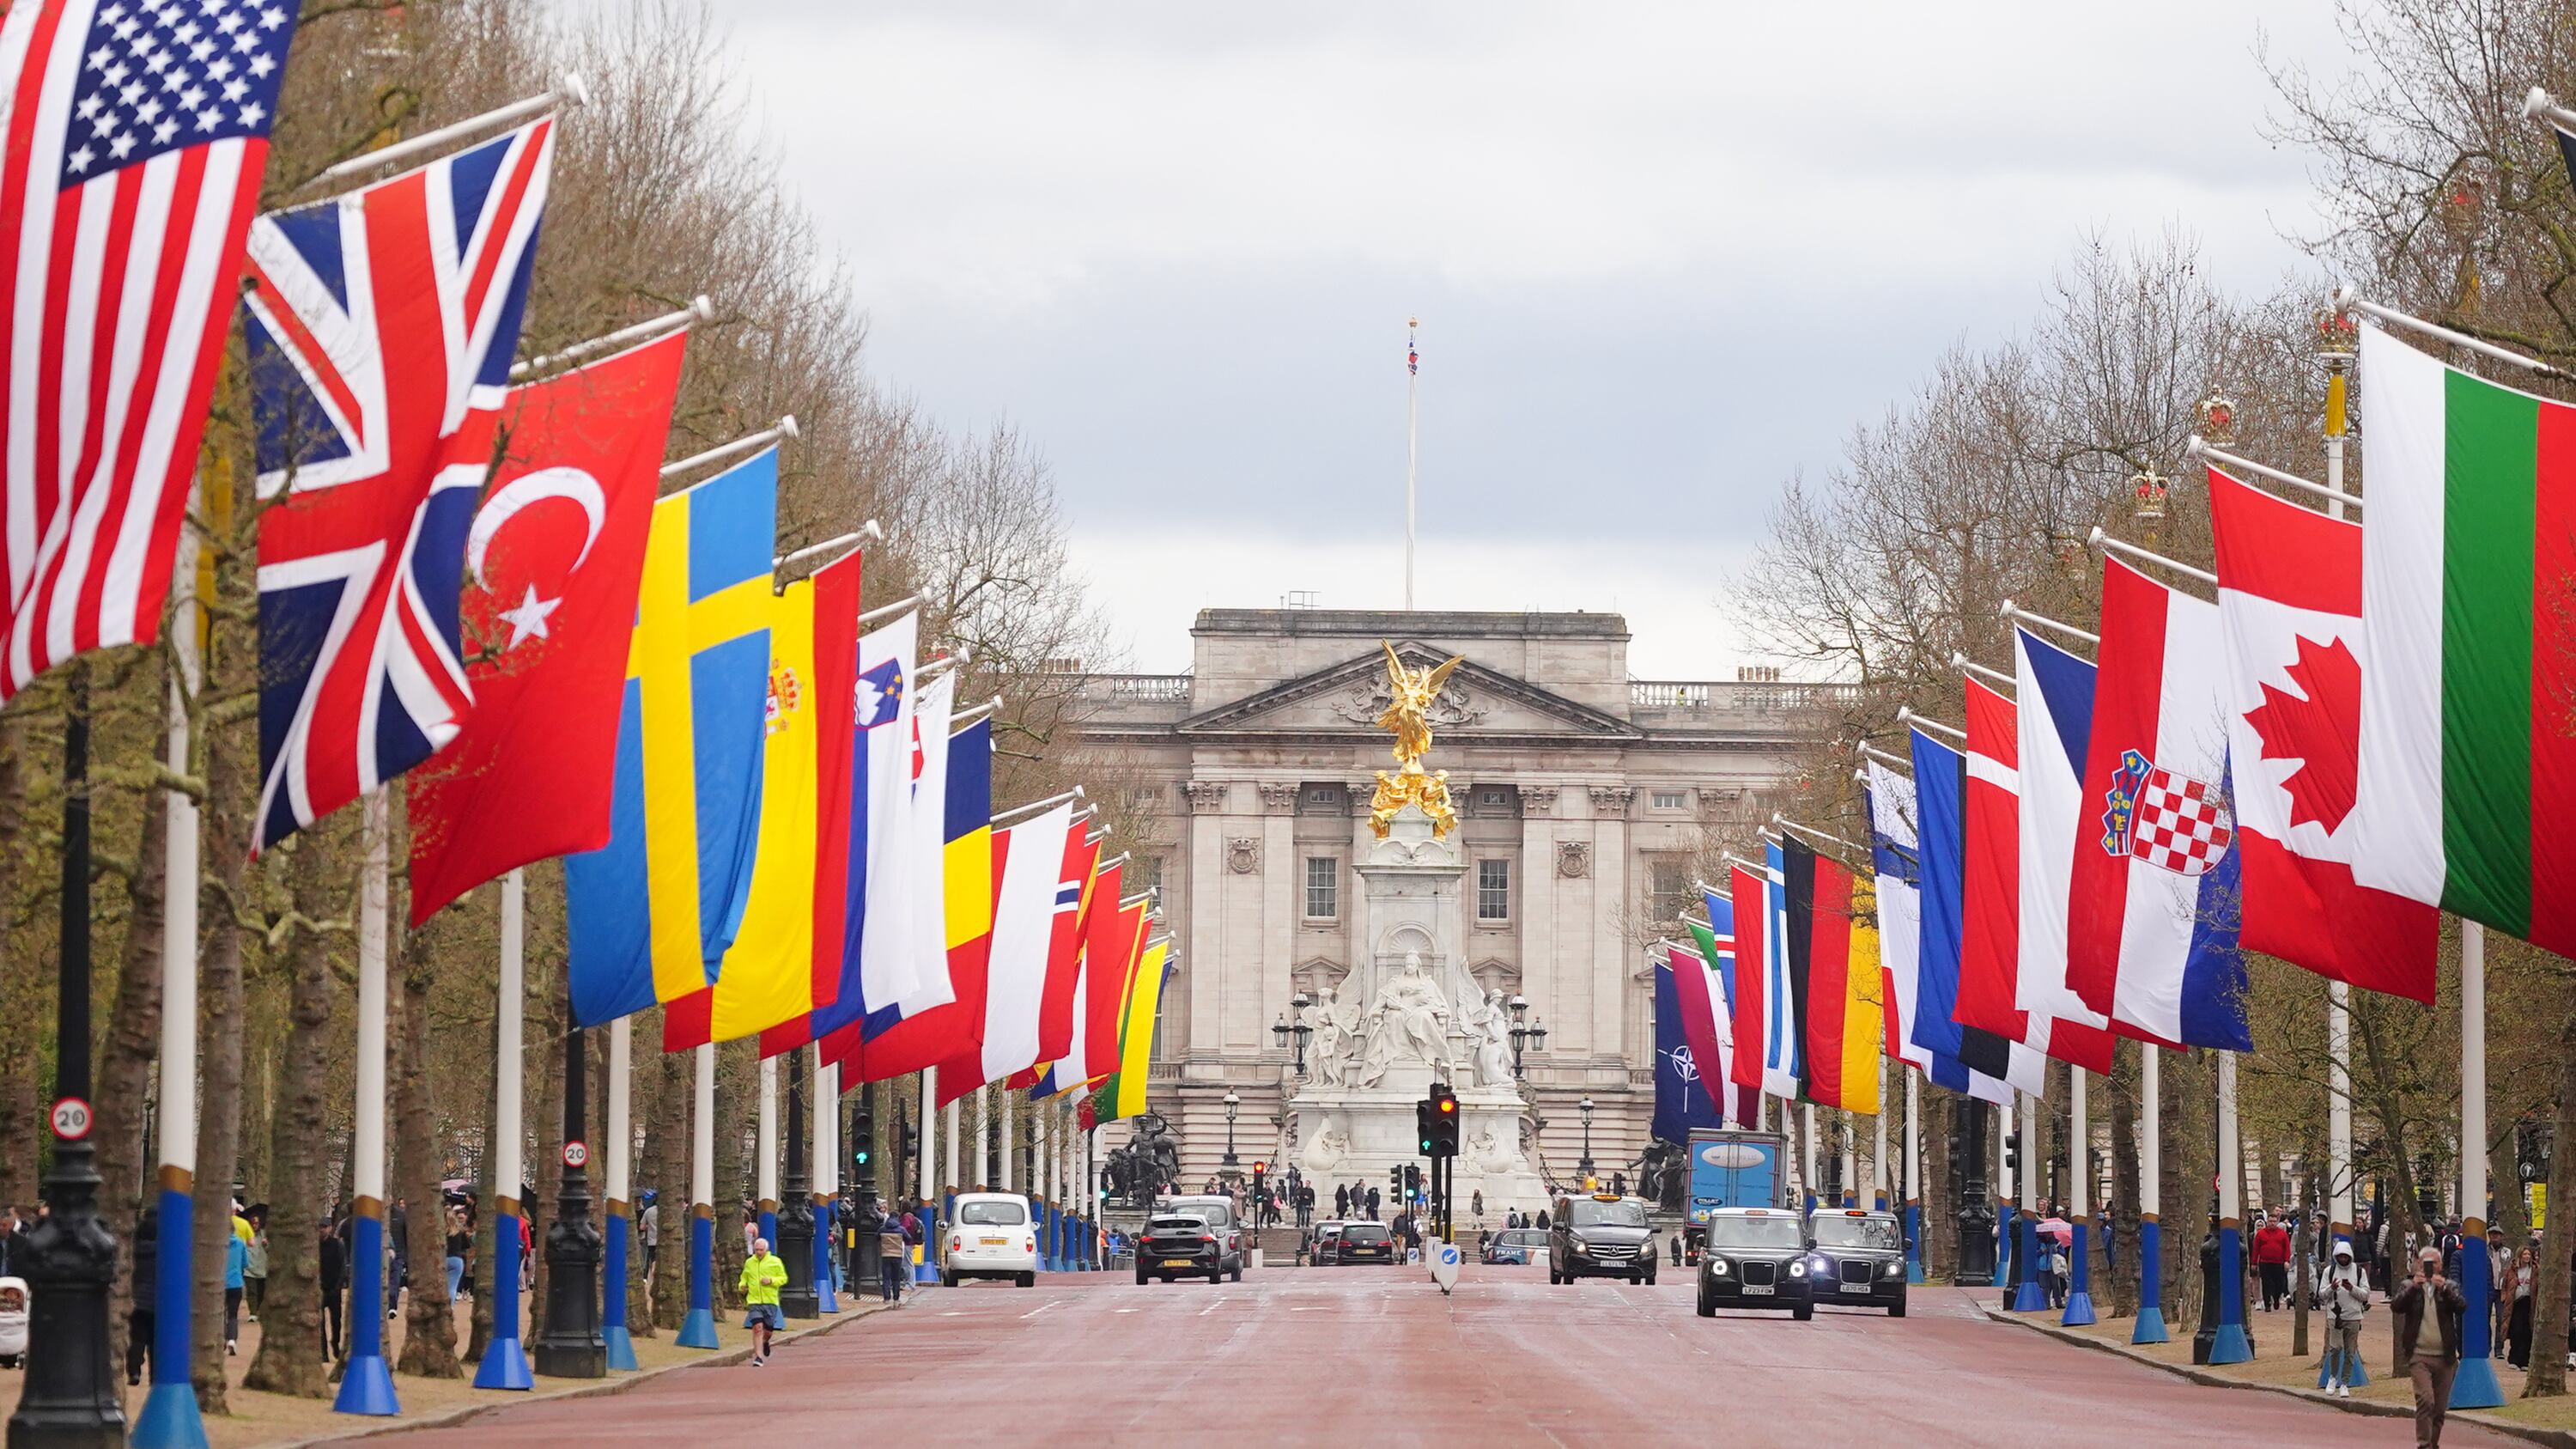 The national flags of Nato member countries hang in The Mall in London, in celebration of the 75th anniversary of the North Atlantic Treaty Organisation